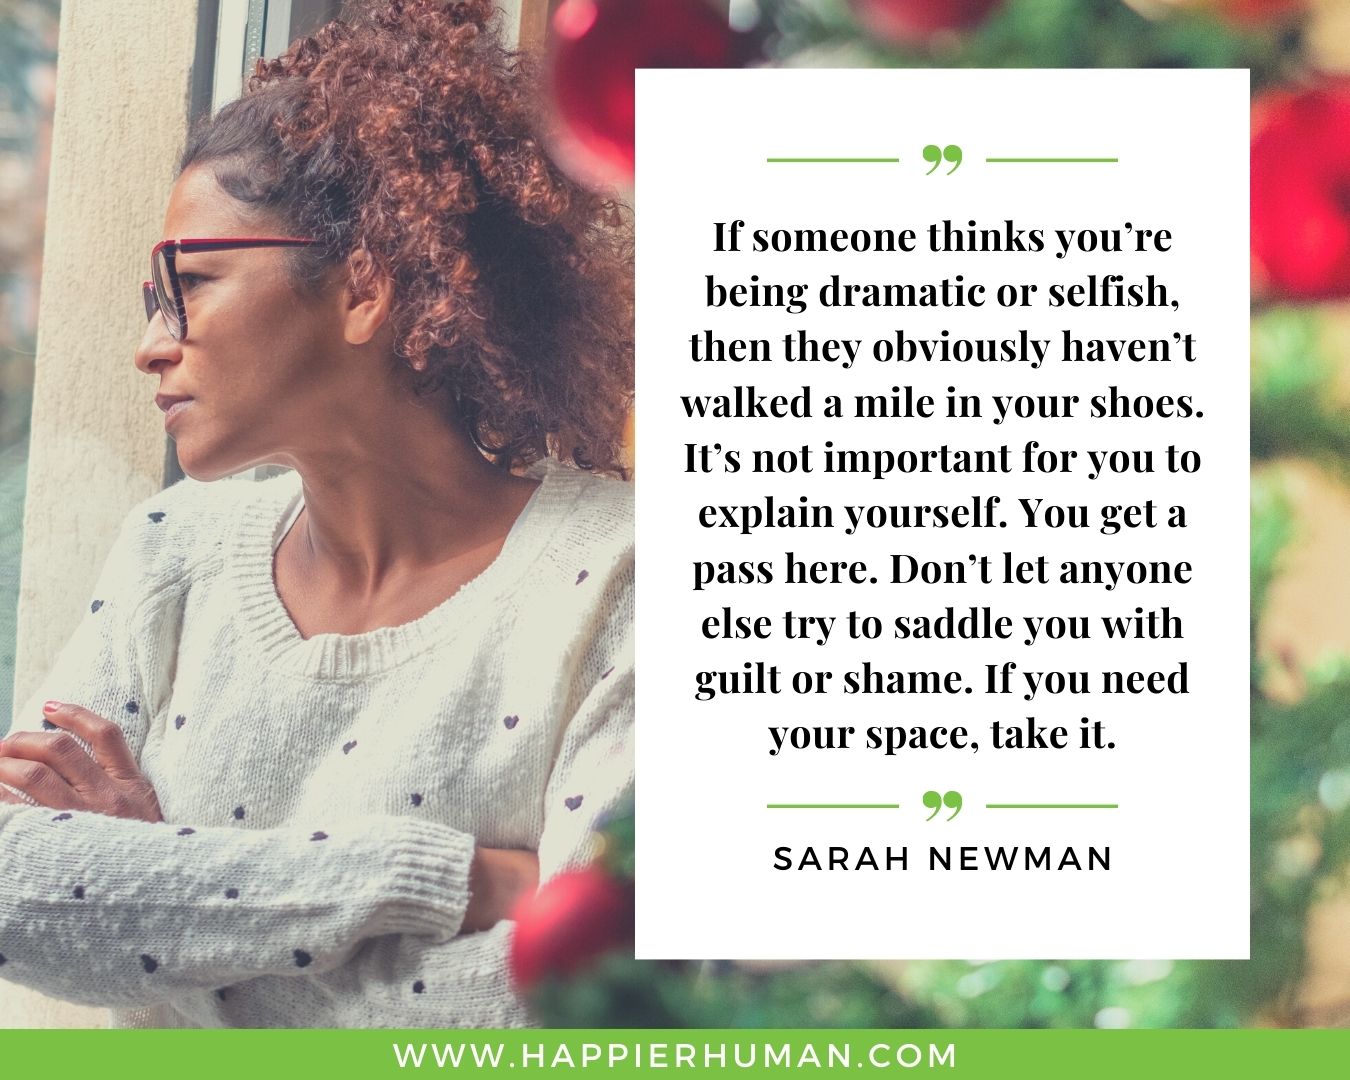 Toxic People Quotes - “If someone thinks you’re being dramatic or selfish, then they obviously haven’t walked a mile in your shoes. It’s not important for you to explain yourself. You get a pass here. Don’t let anyone else try to saddle you with guilt or shame. If you need your space, take it.” – Sarah Newman